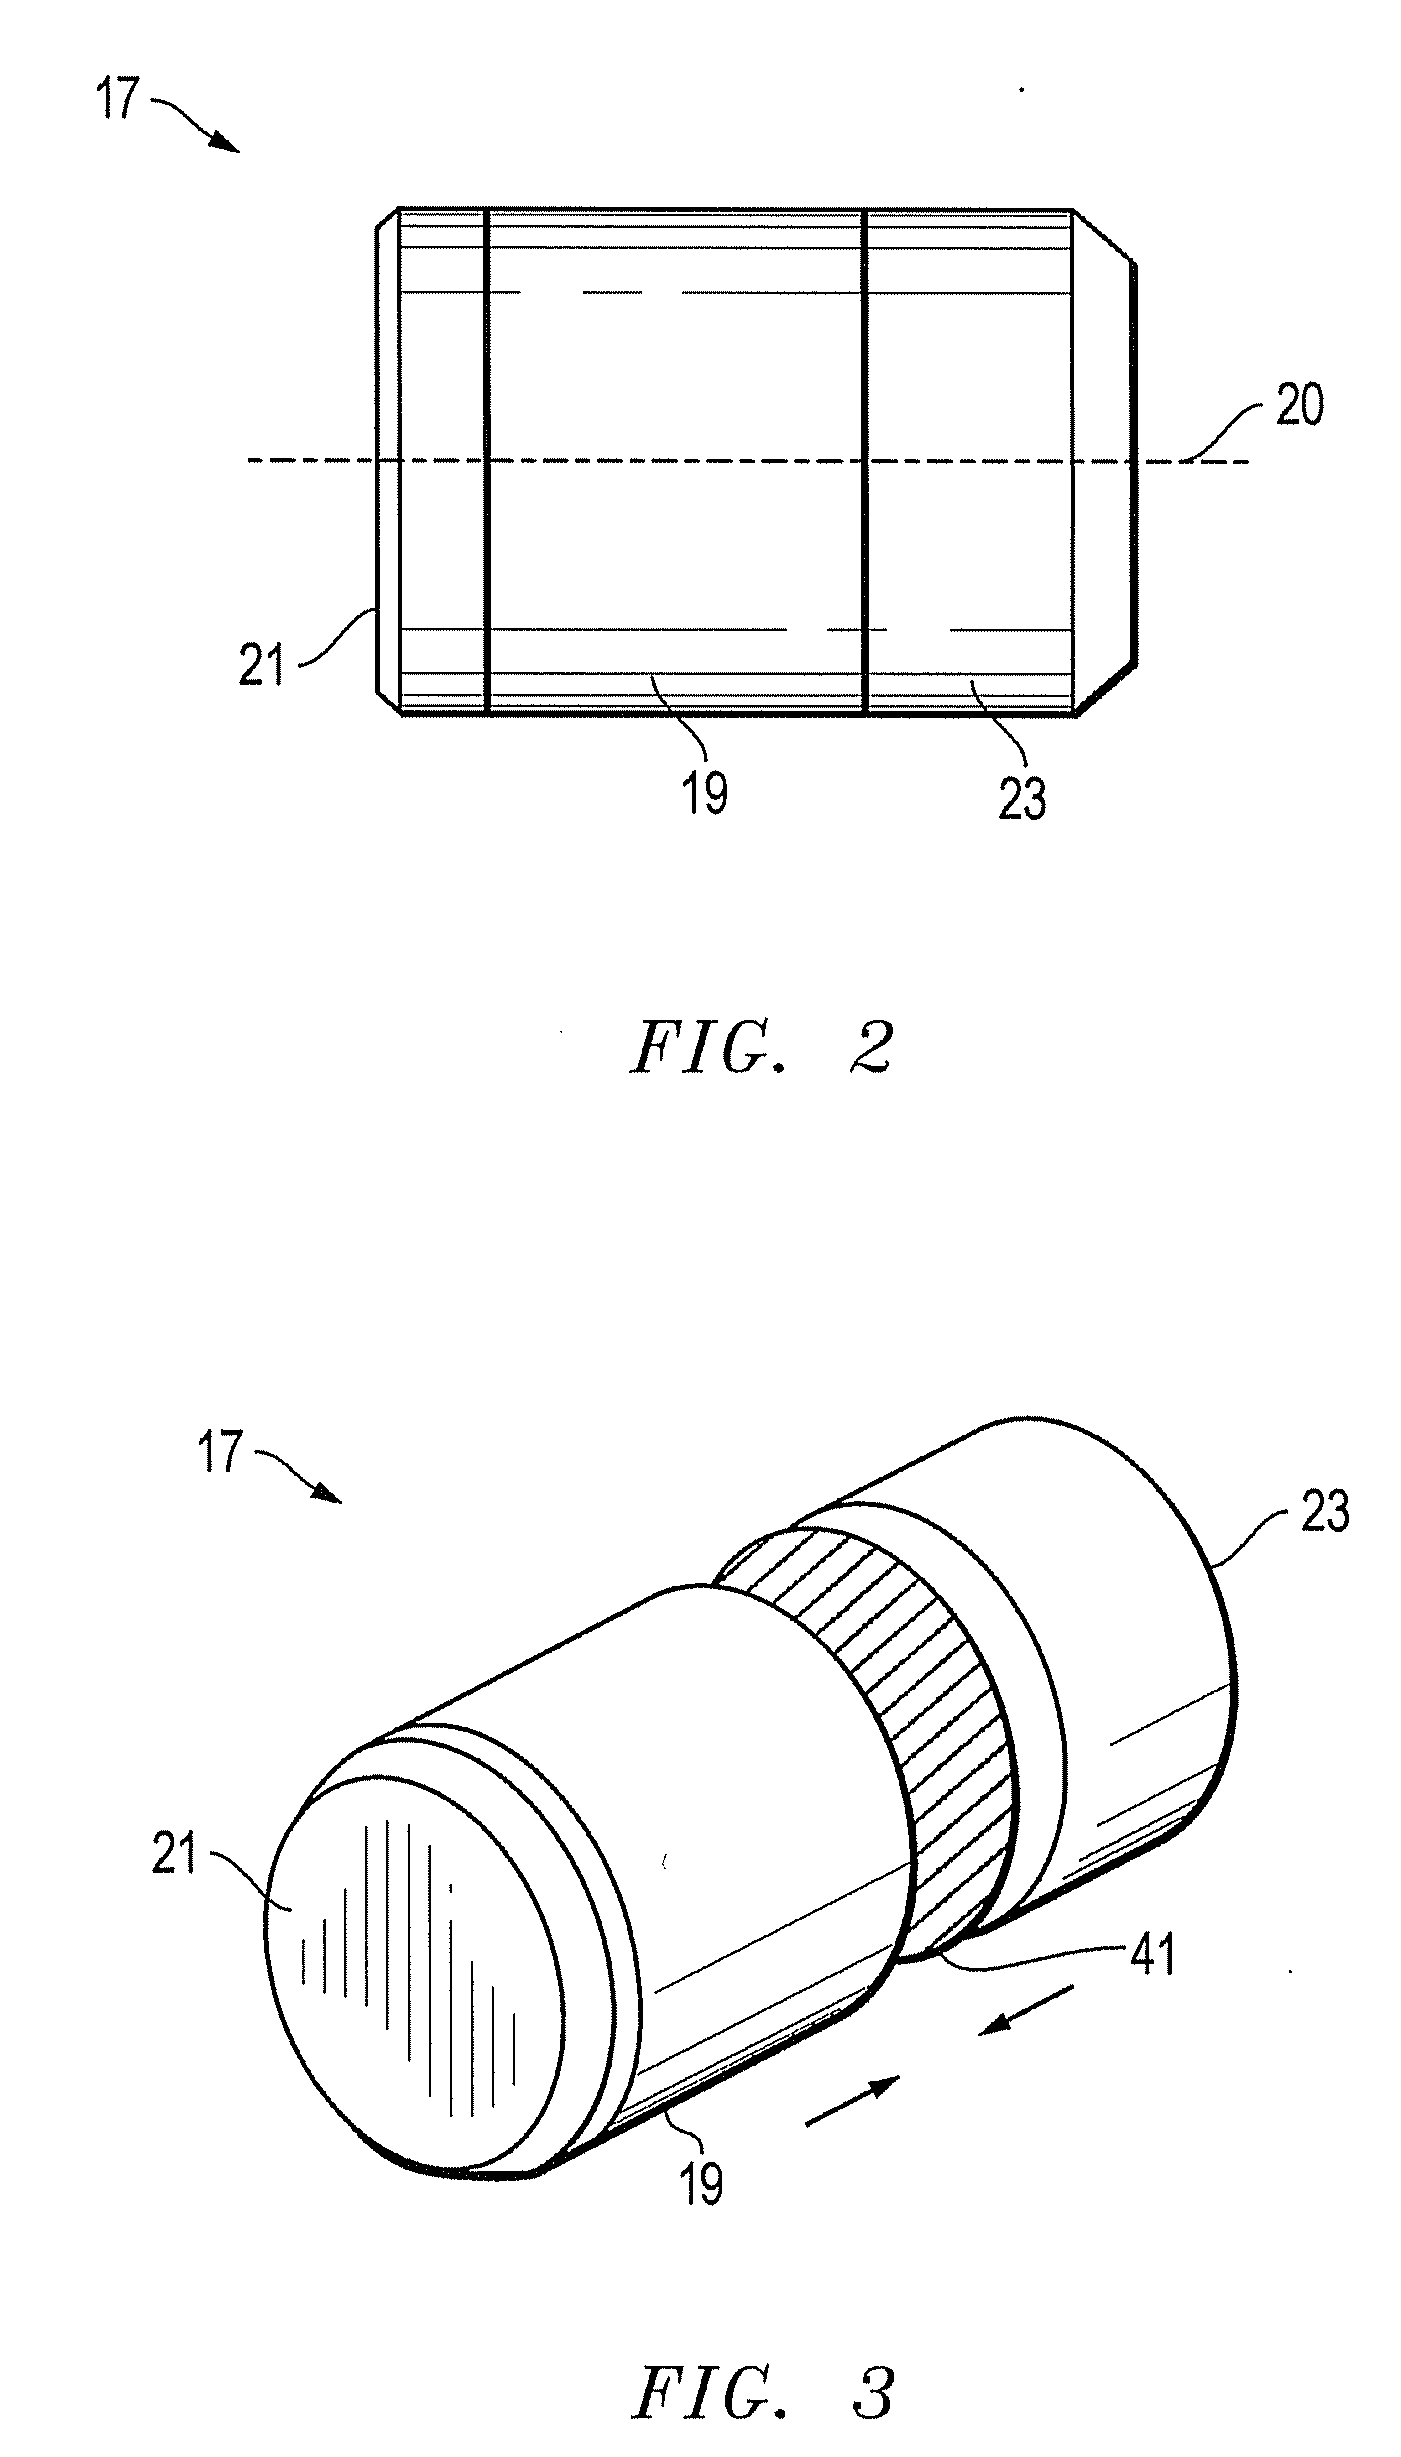 System, method, and apparatus for reactive foil brazing of cutter components for fixed cutter bit